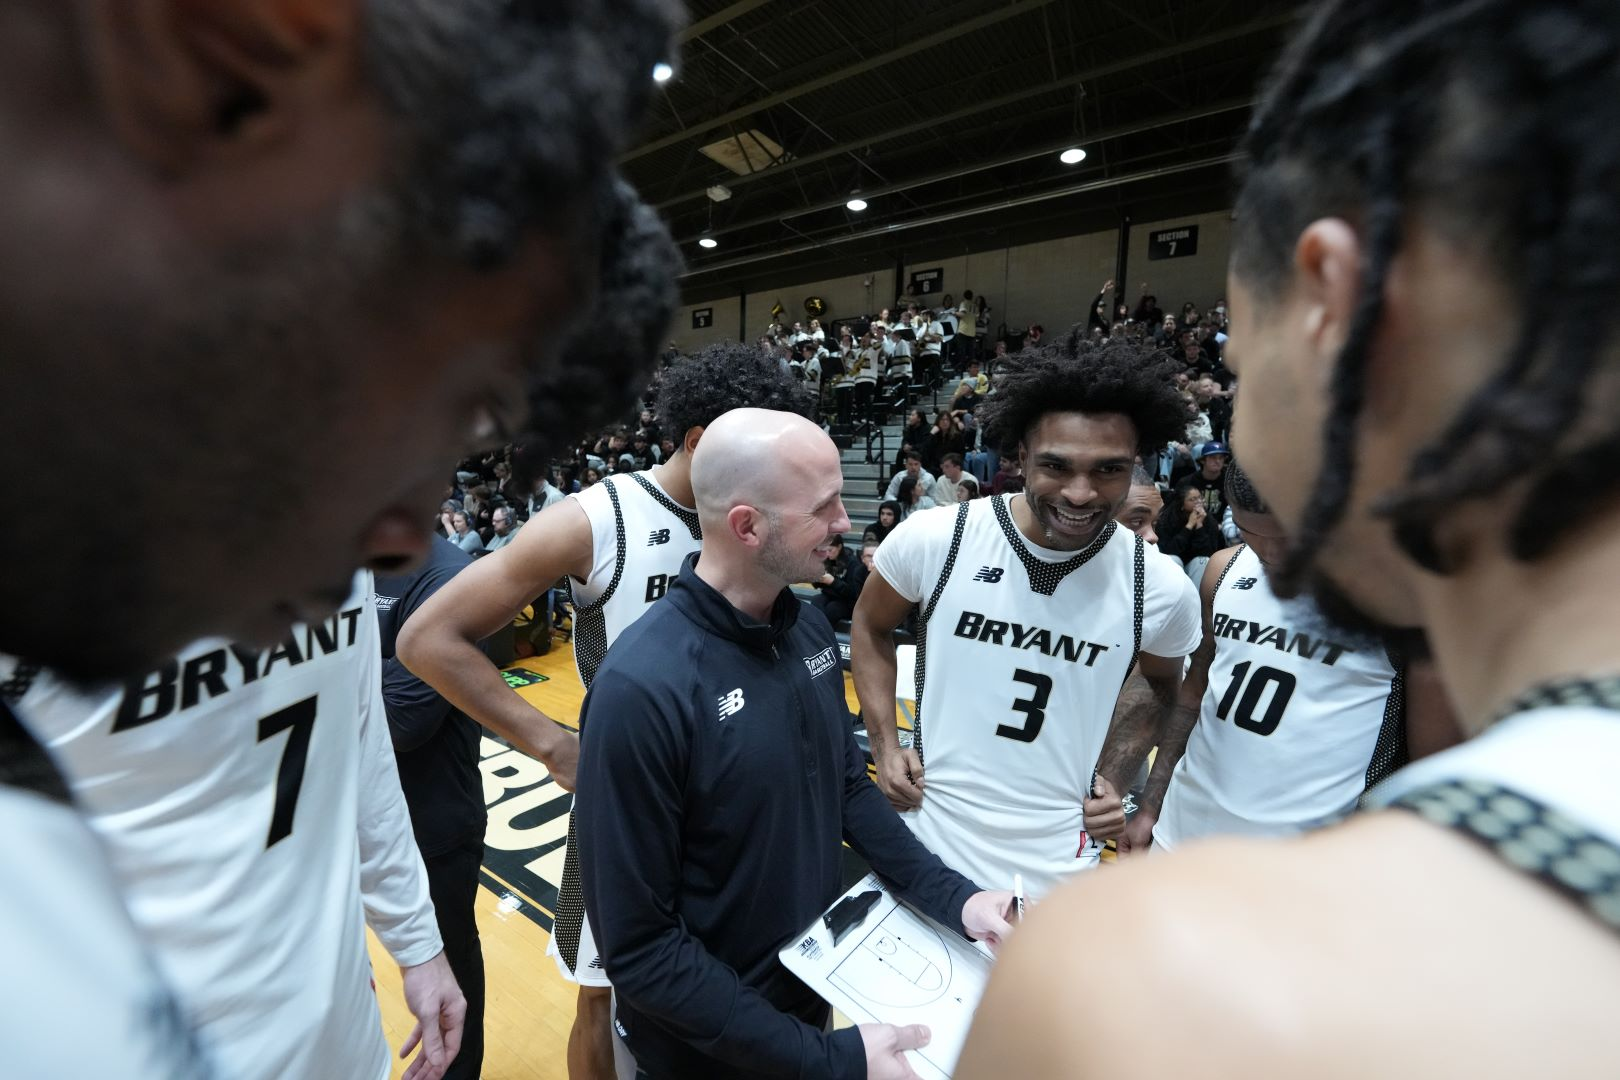 Podcast: Changes at Bryant, weekend challenges, women's rivalries renewed